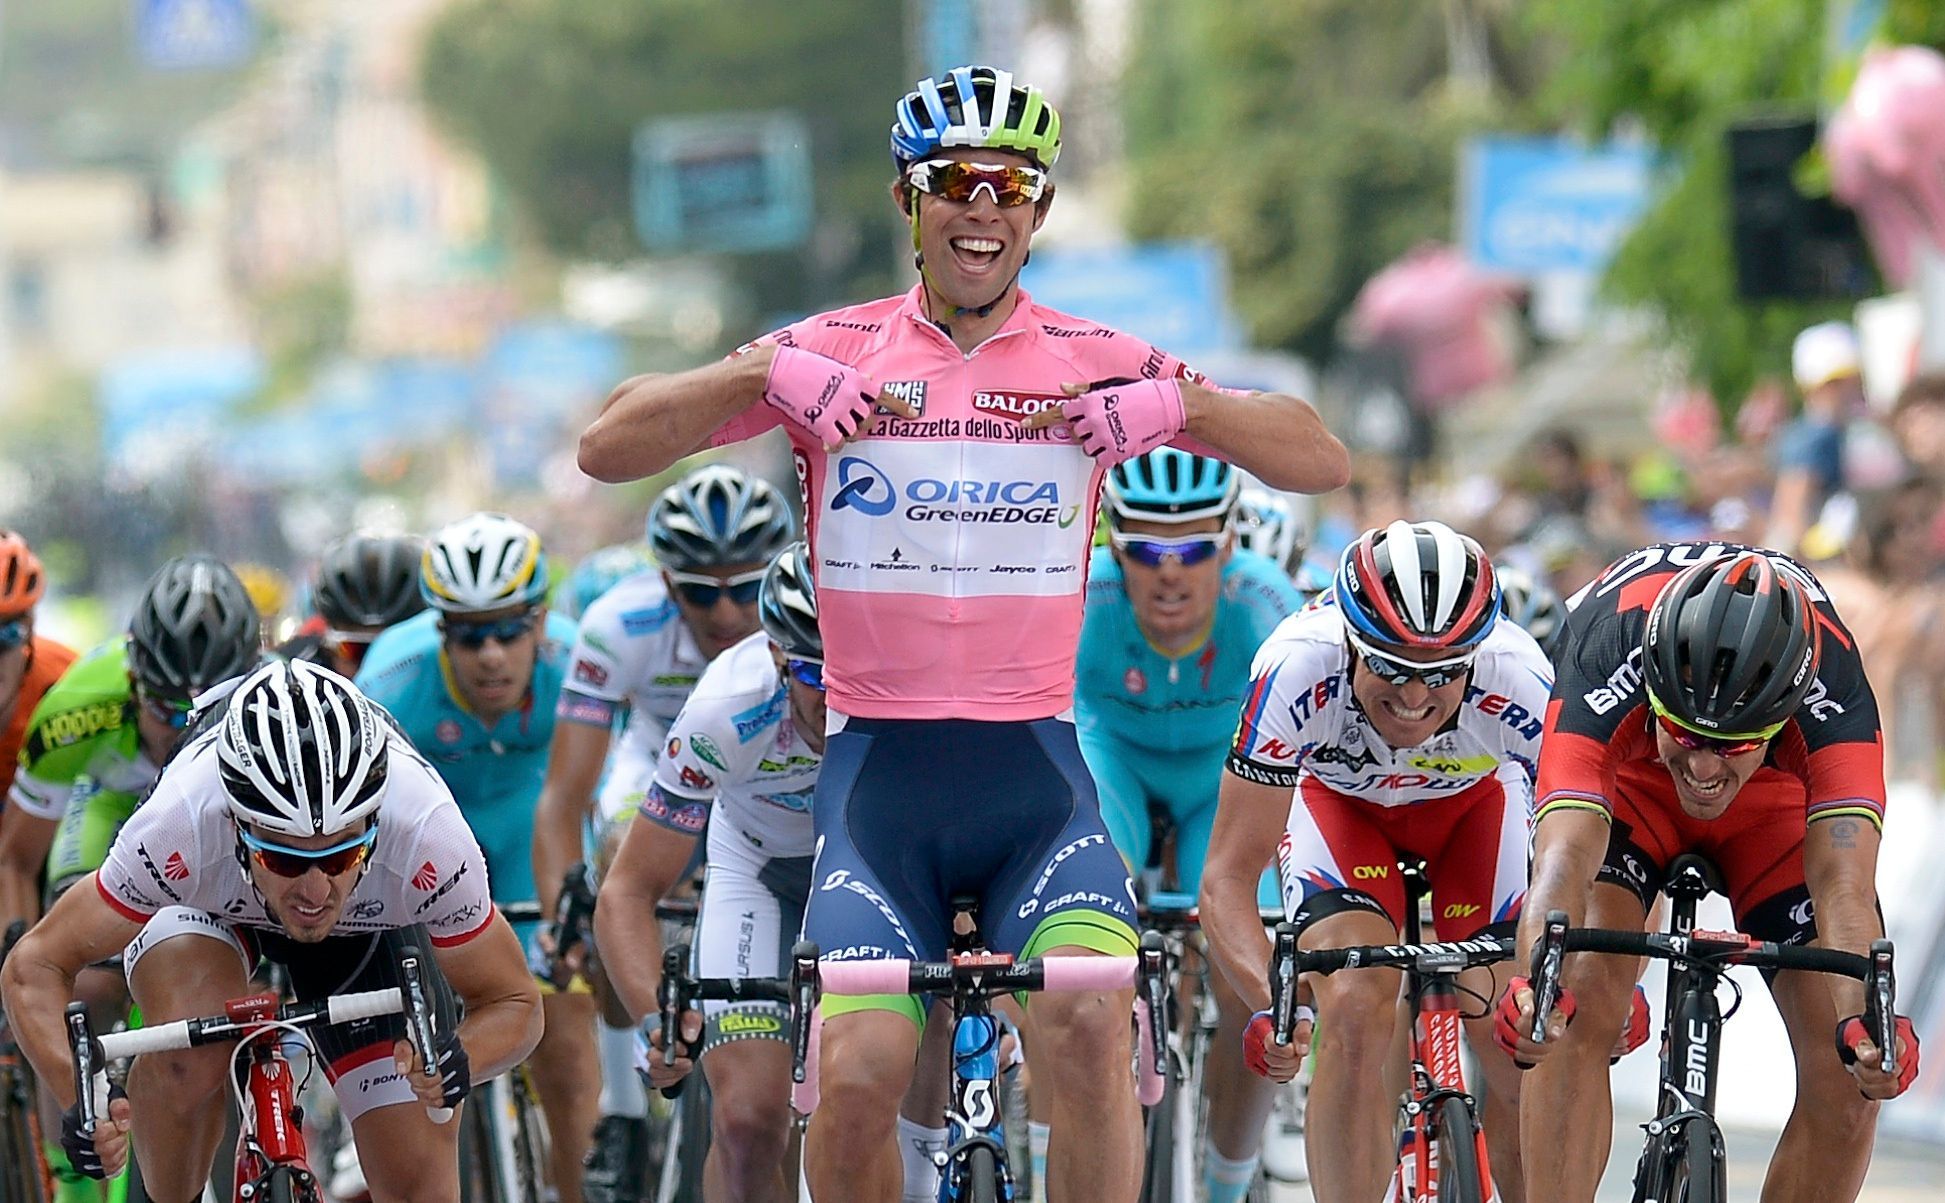 Orica Greenedge rider Matthews celebrates after crossing the finish line of the third stage of the 98th Giro d'Italia cycling race